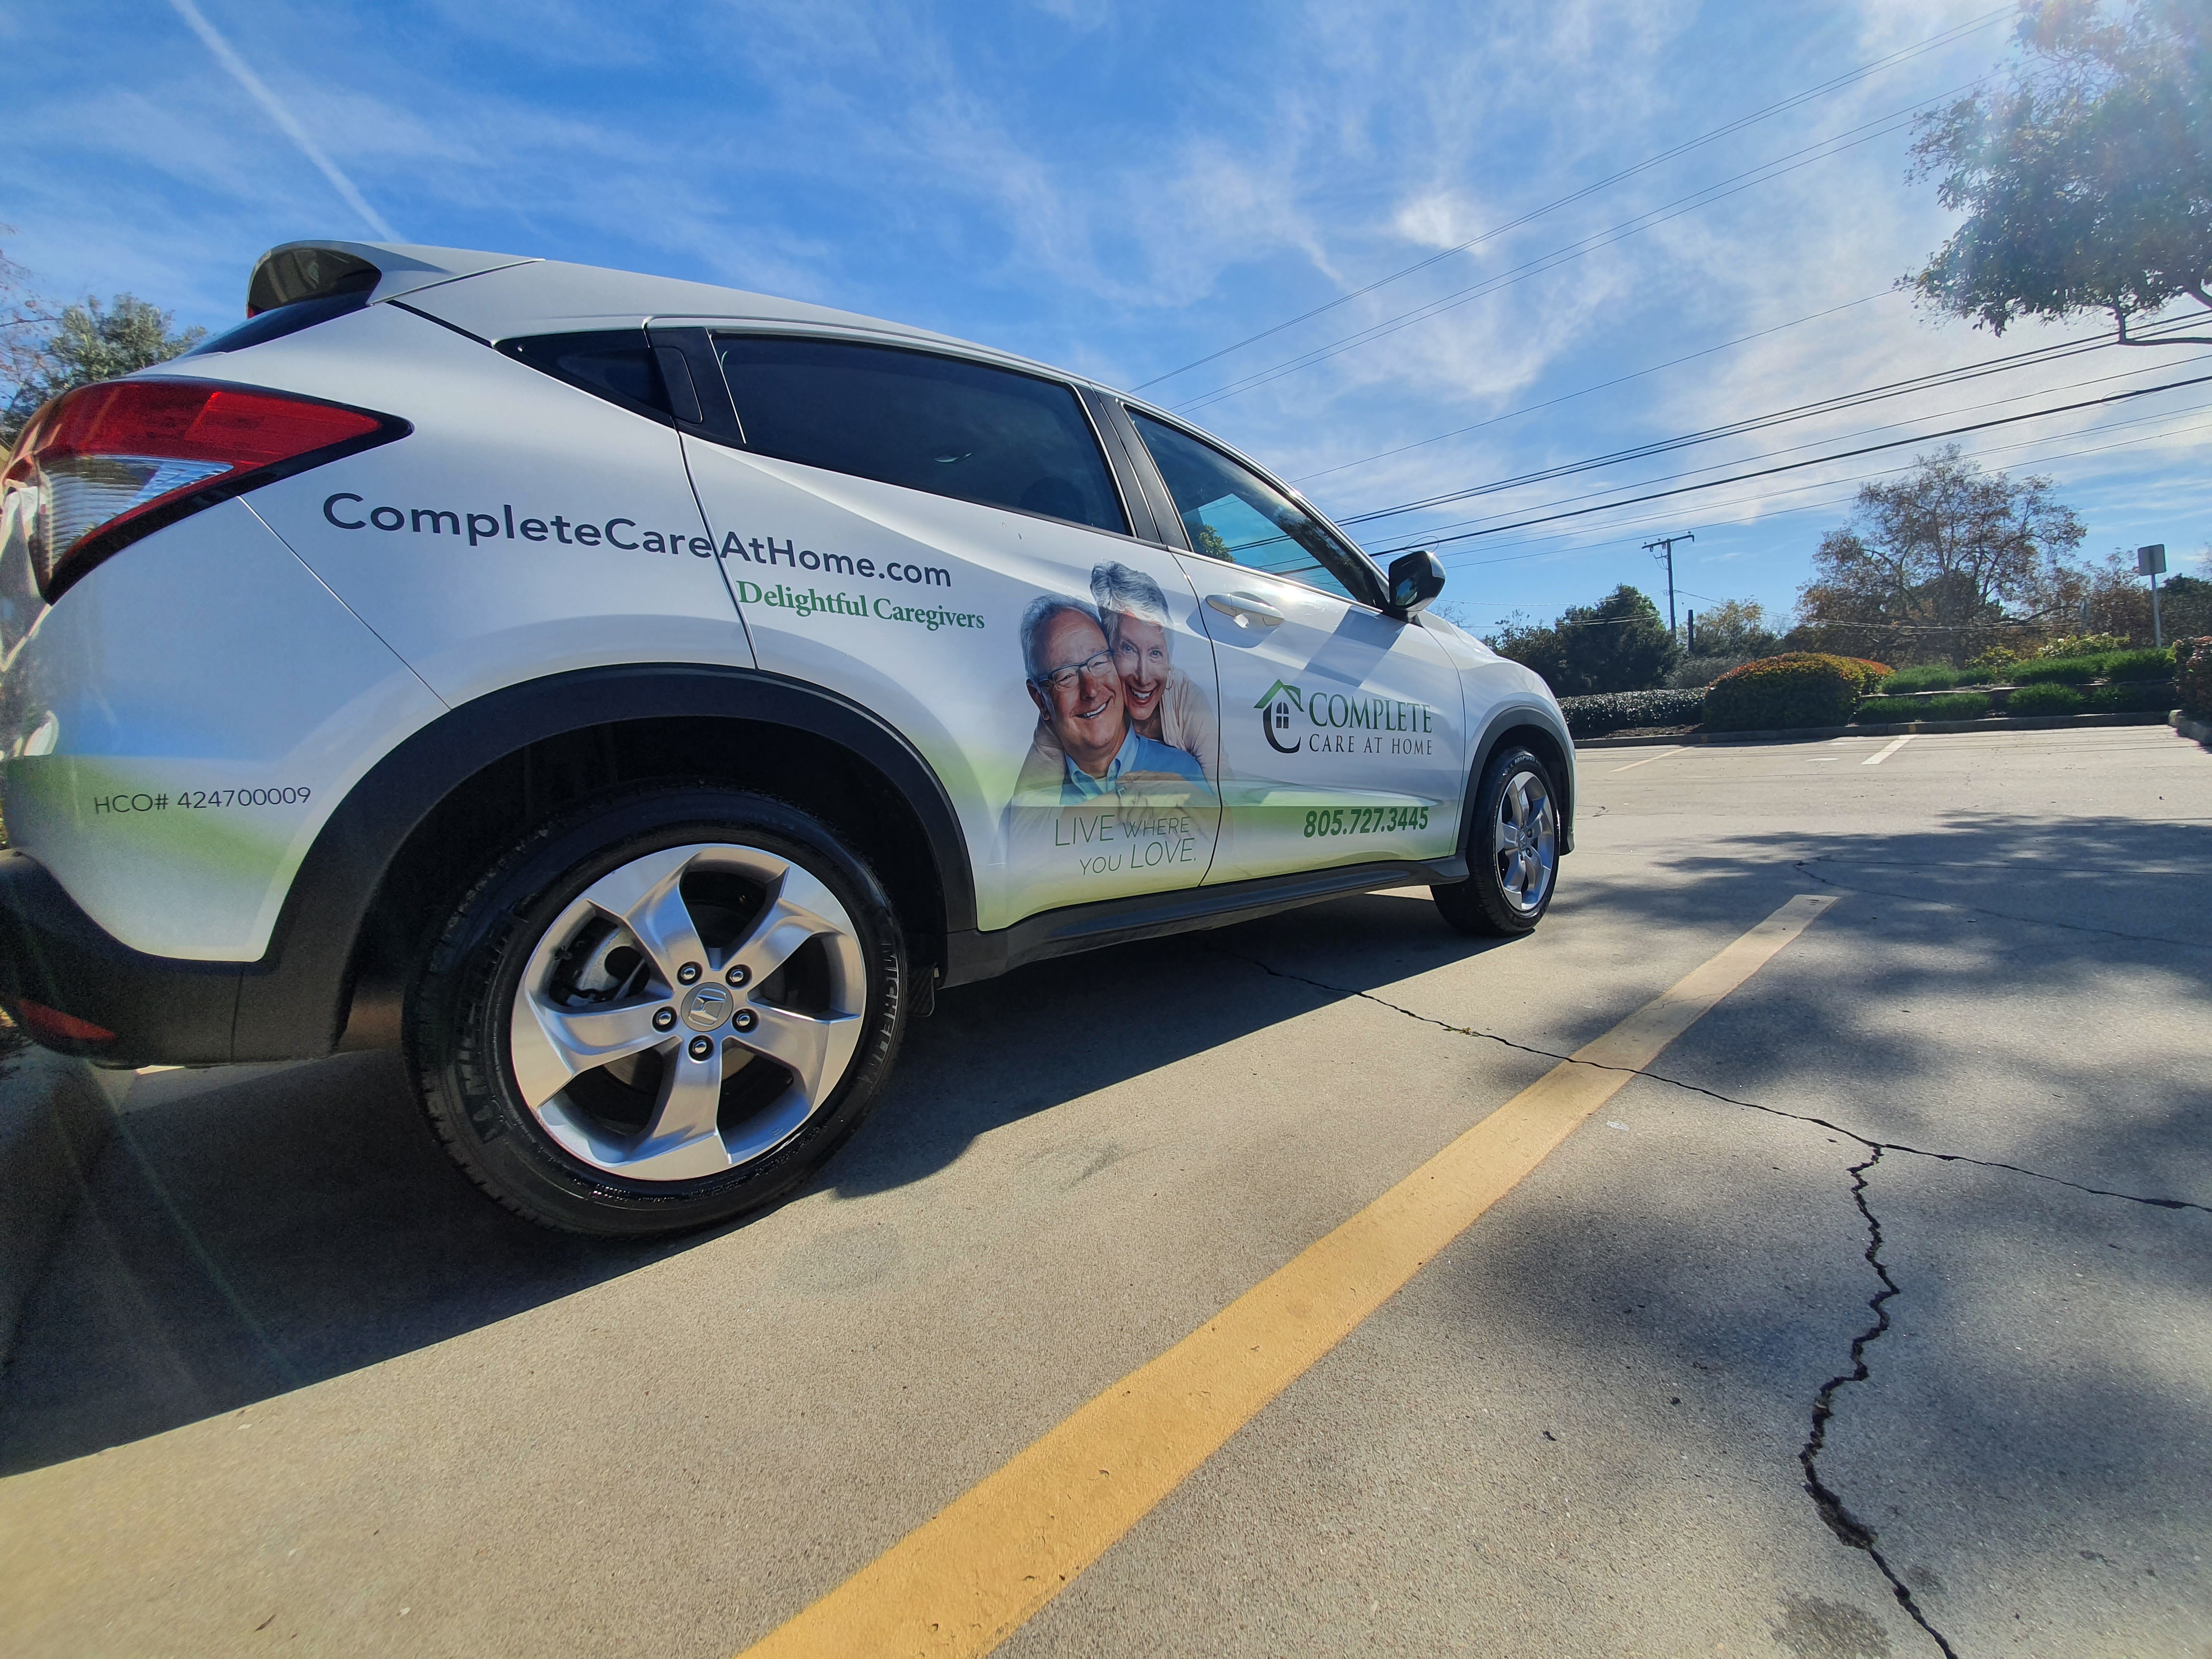 Complete Care at Home Launches Complete Care Transport in Santa Barbara County